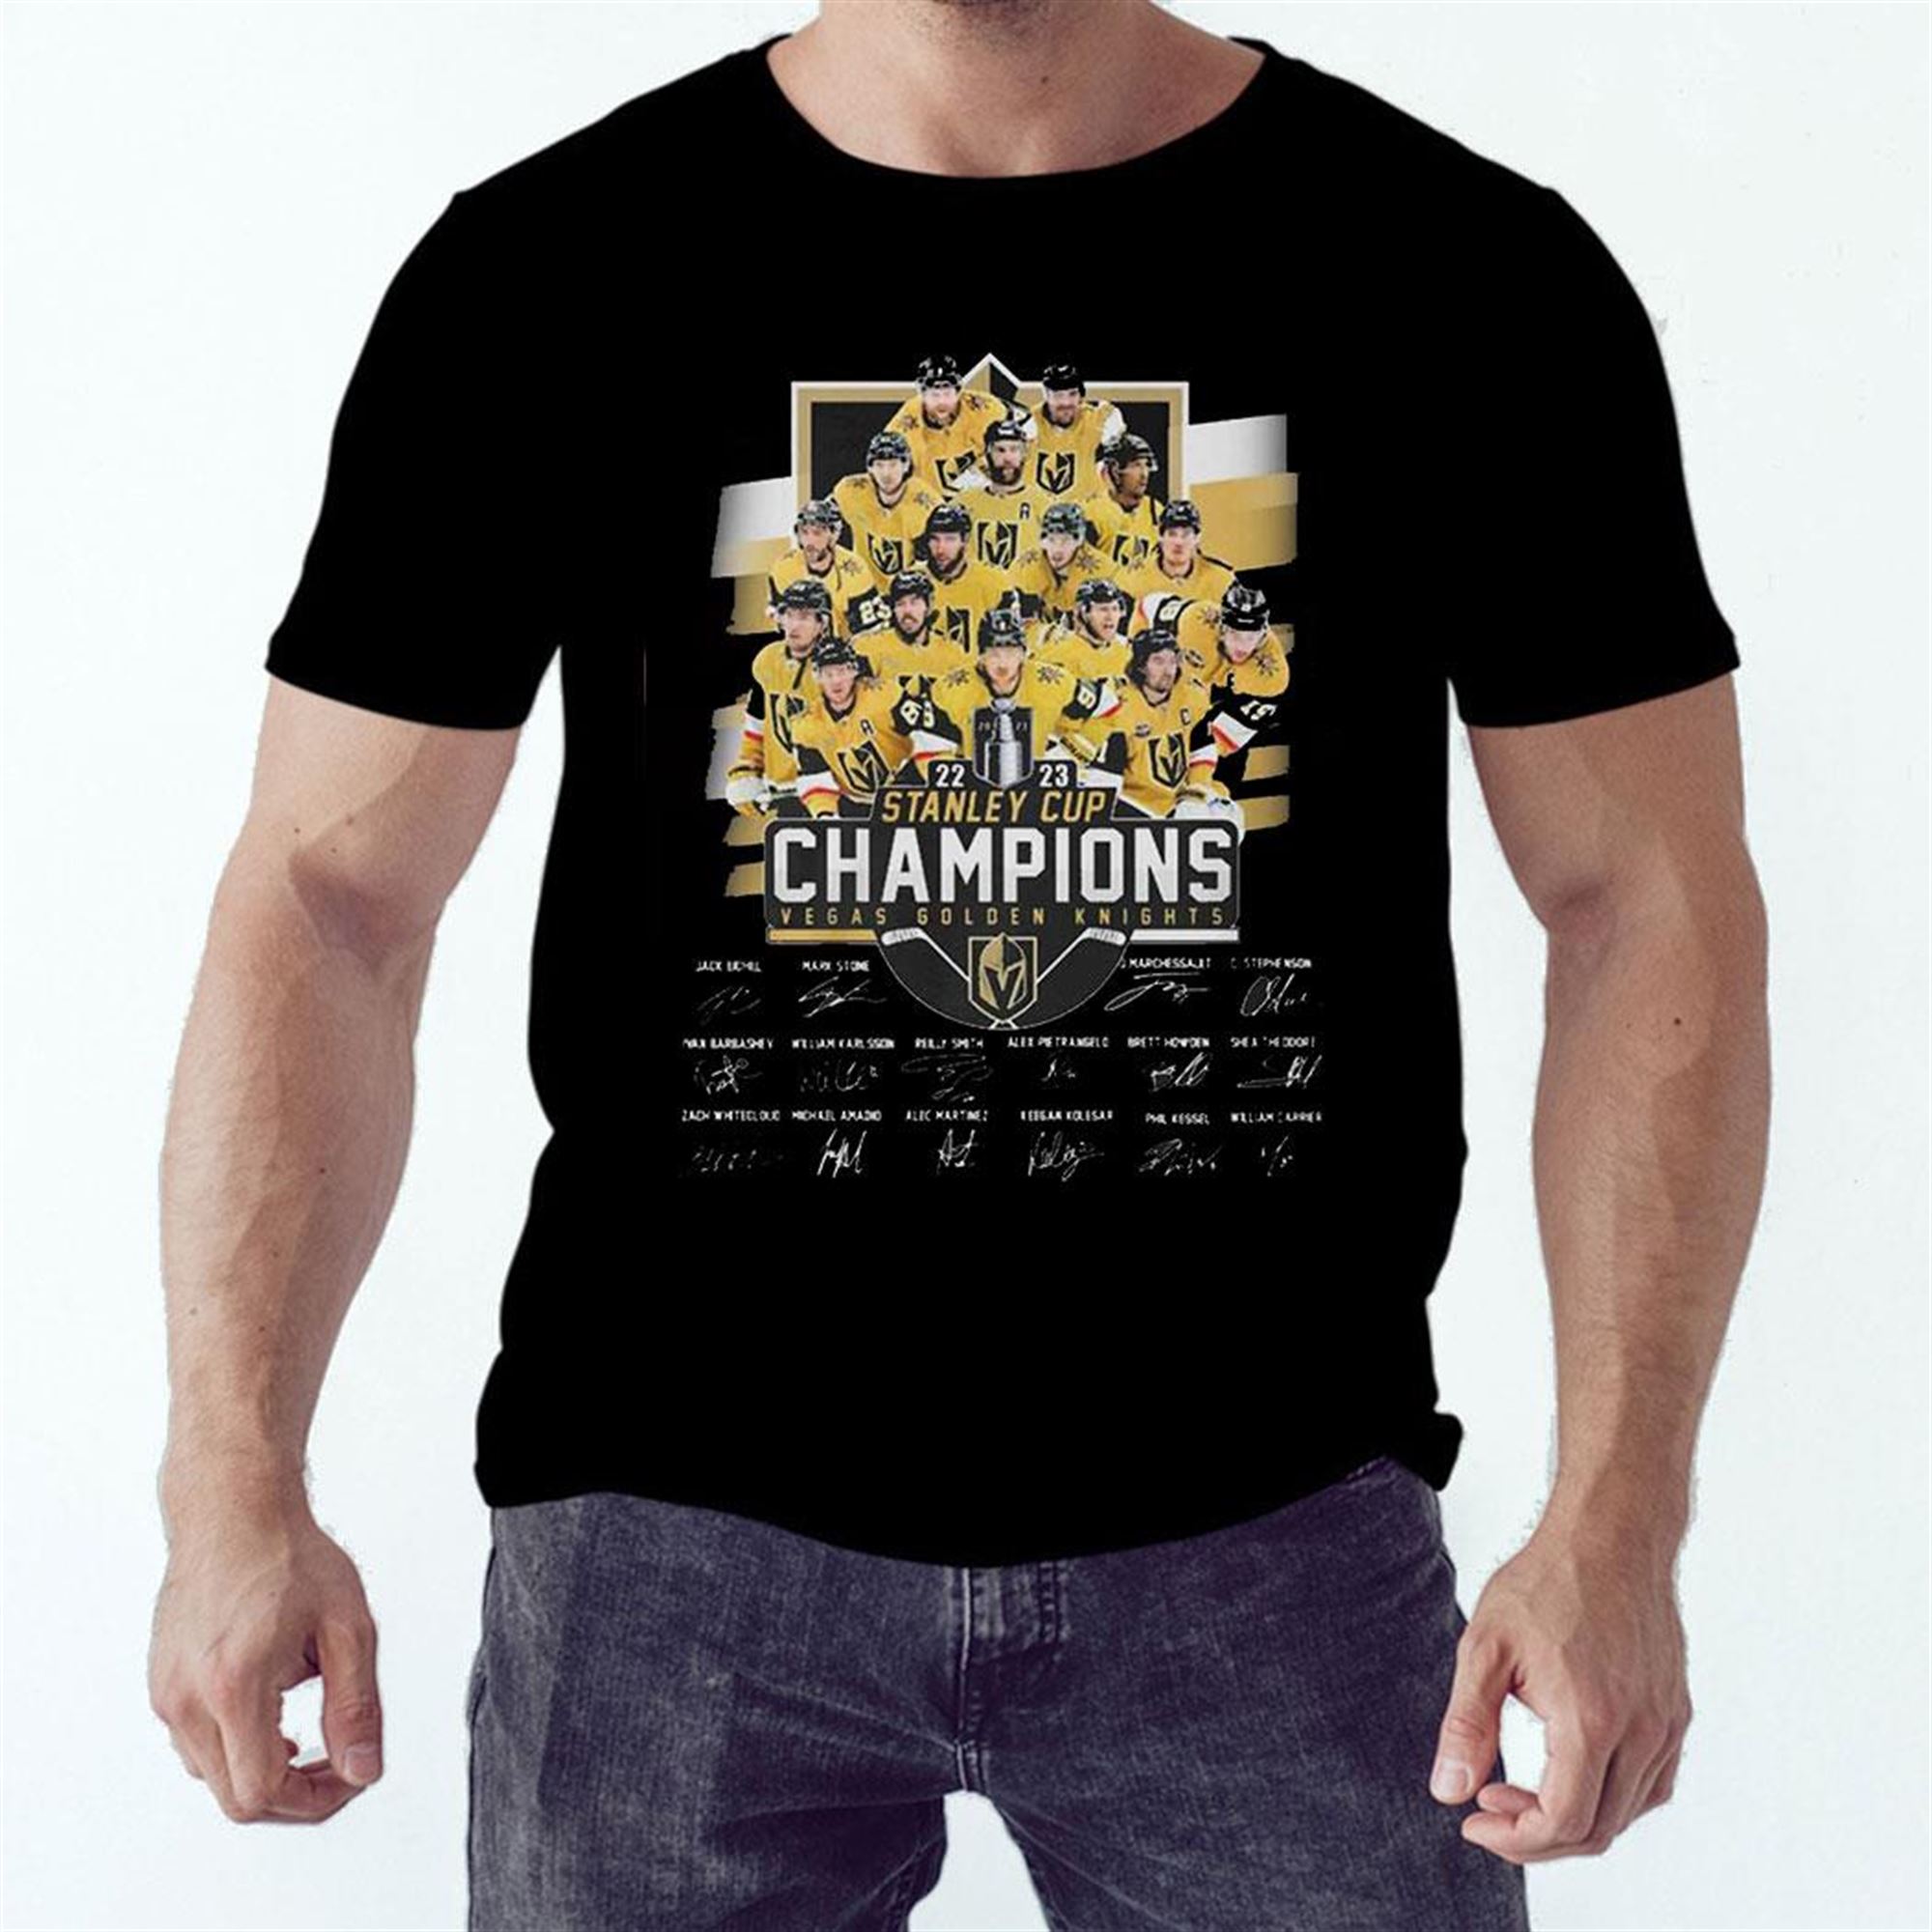 Official Vegas Golden Knights Stanley Cup Champions 2023 T-shirt